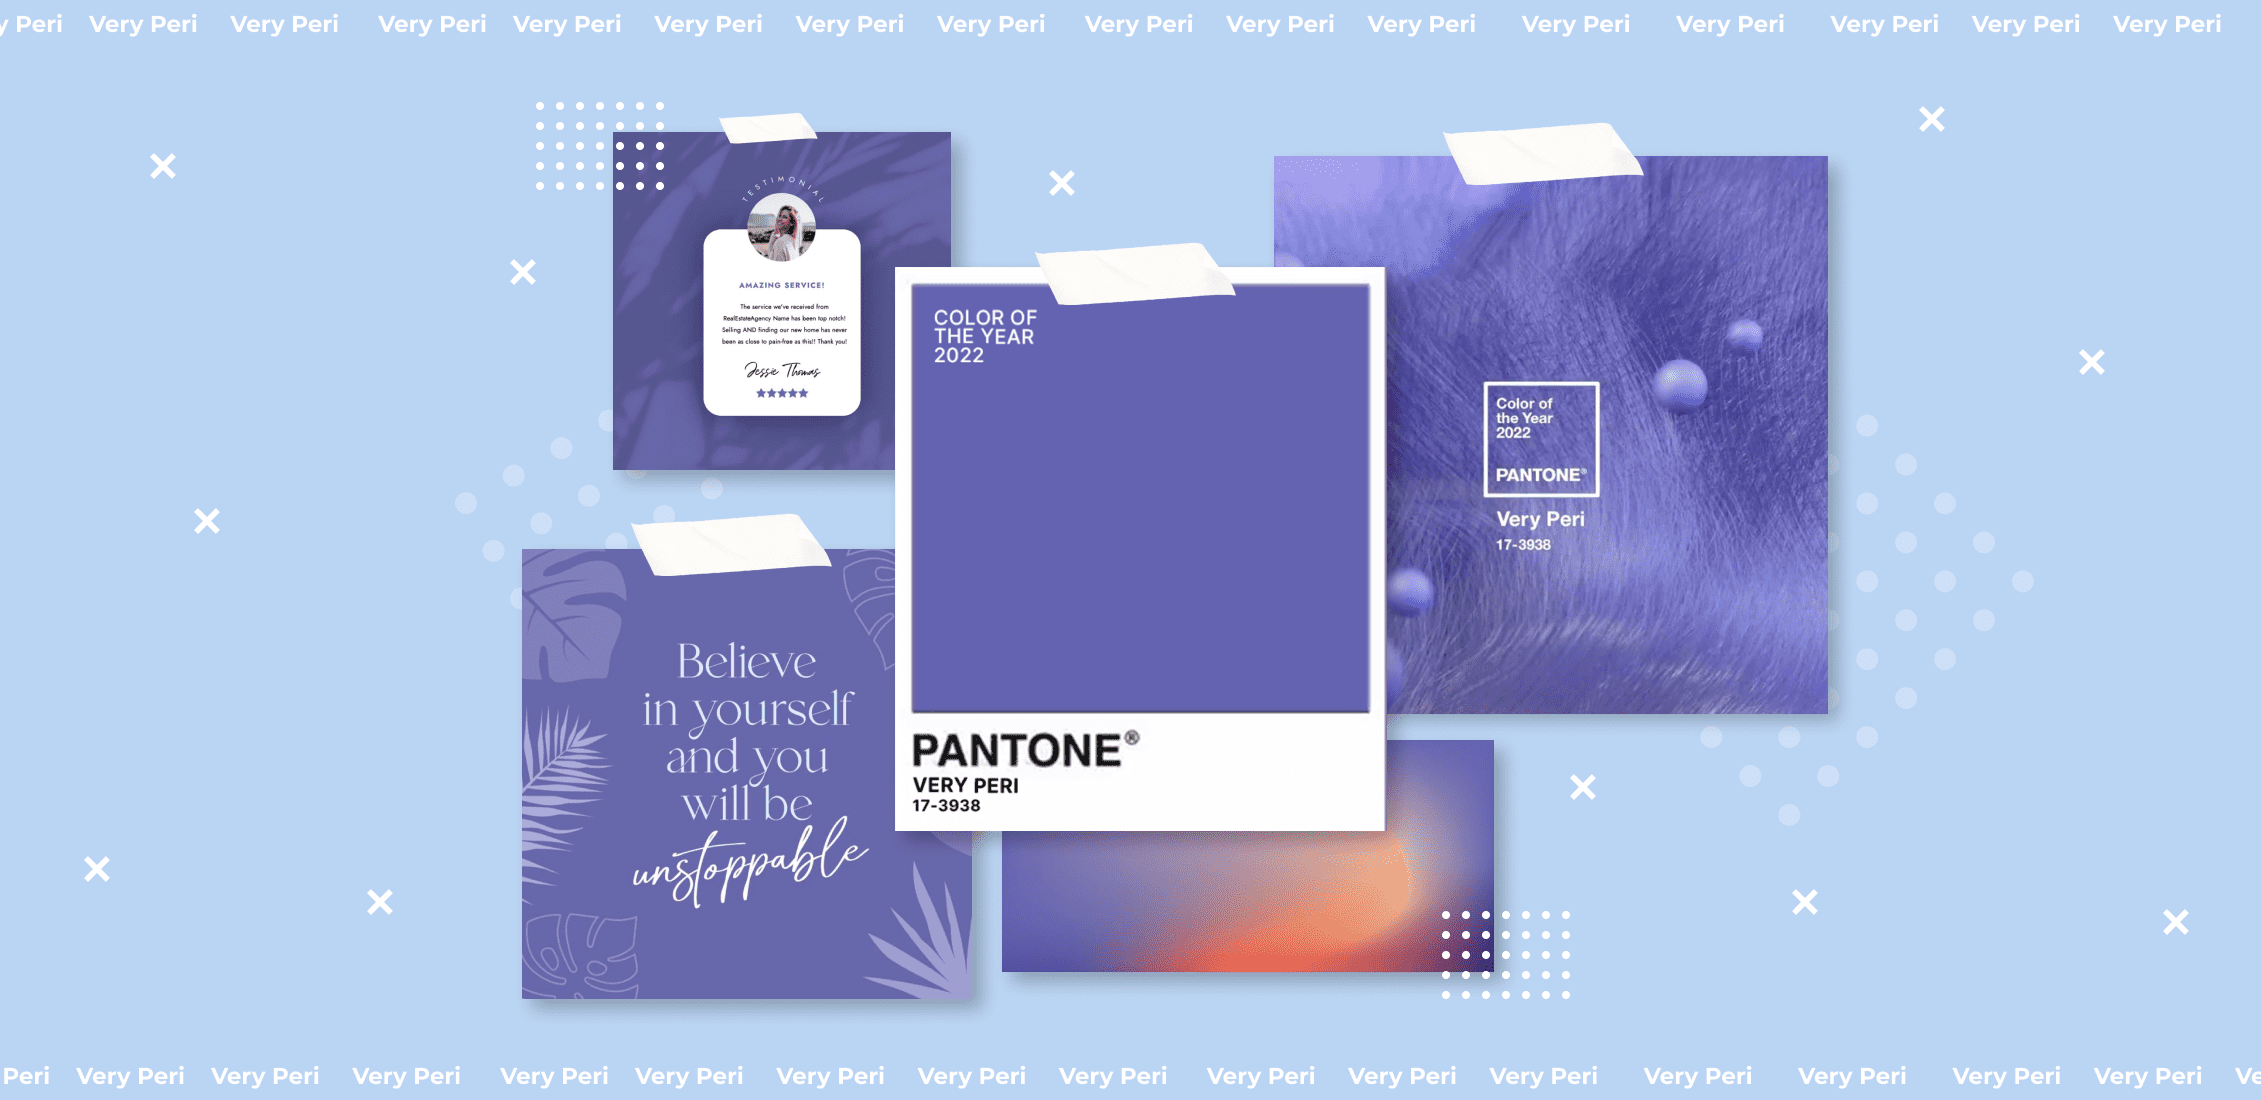 very peri the pantone color of 2022 featured image.